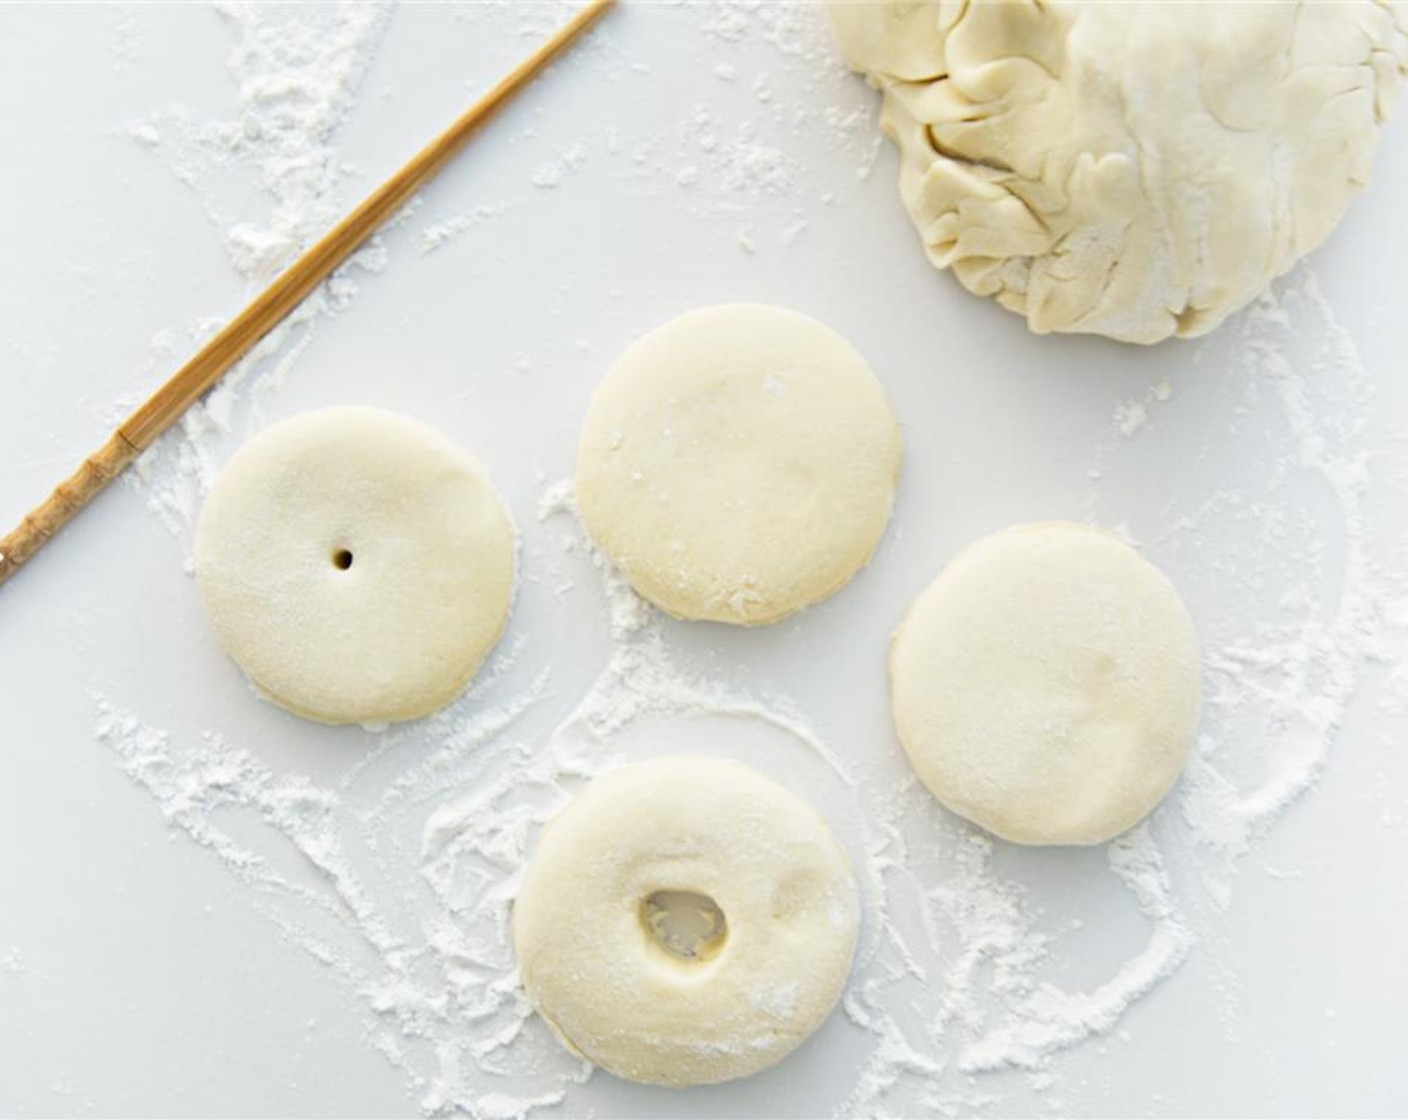 step 6 With a floured cutter or a round glass, cut the rolled dough into doughnuts. Use a chopstick to make the holes by sticking it in the center and swirling until the hole is 1 to 2 inches wide. Gather the scraps and recombine them into the dough for more doughnuts.